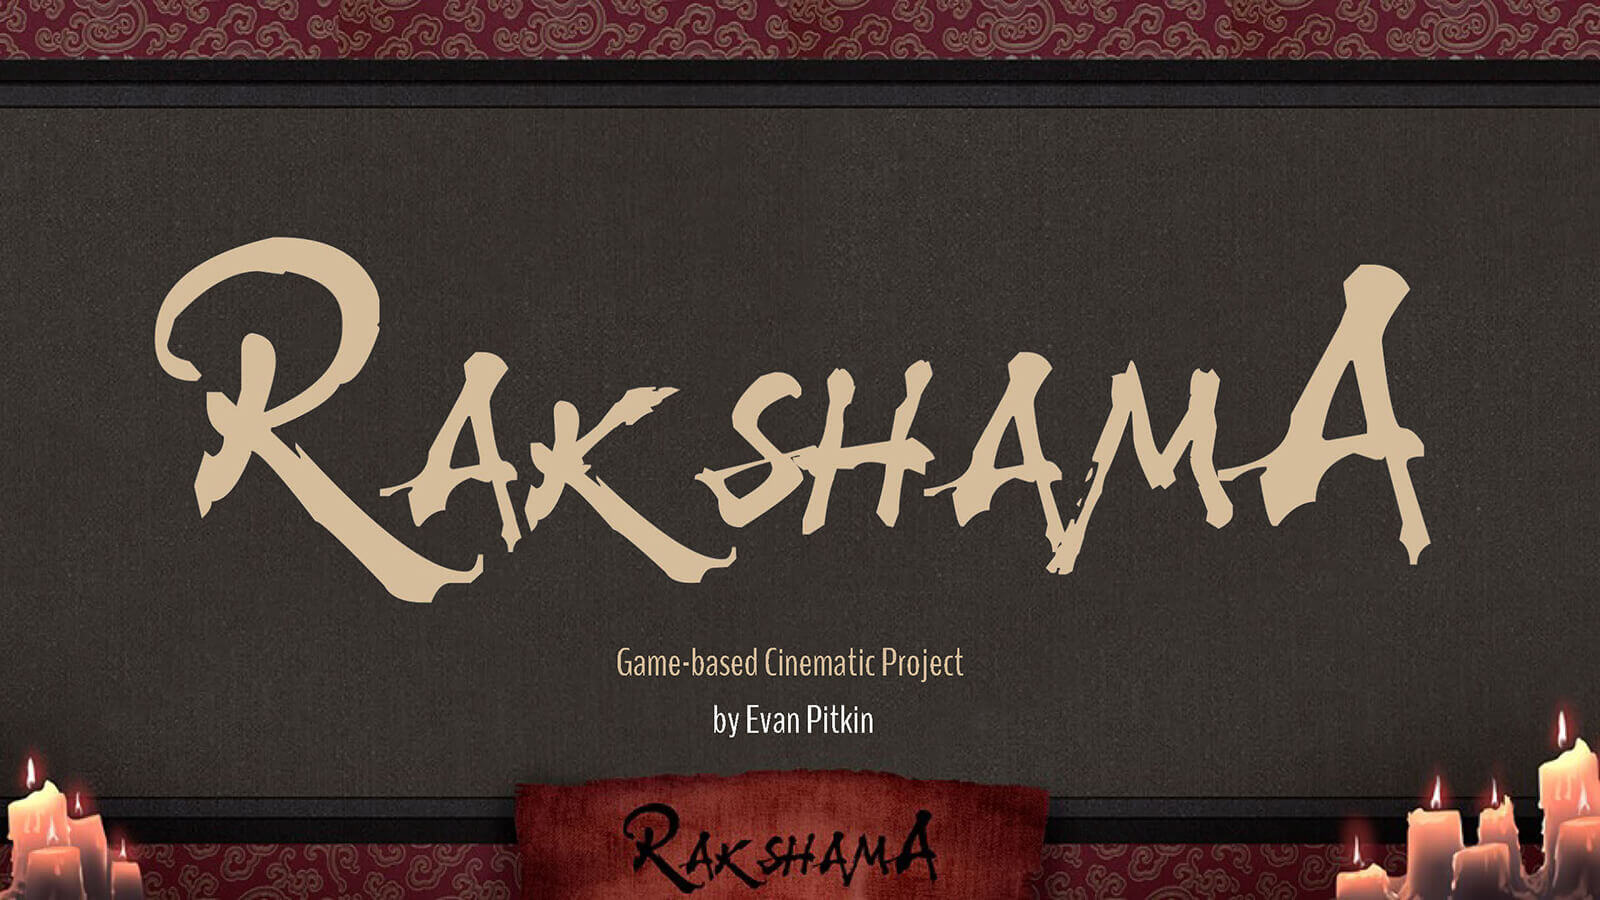 Title card reading "Rakshama" in beige script on a black background, with half-melted candles in the bottom corners